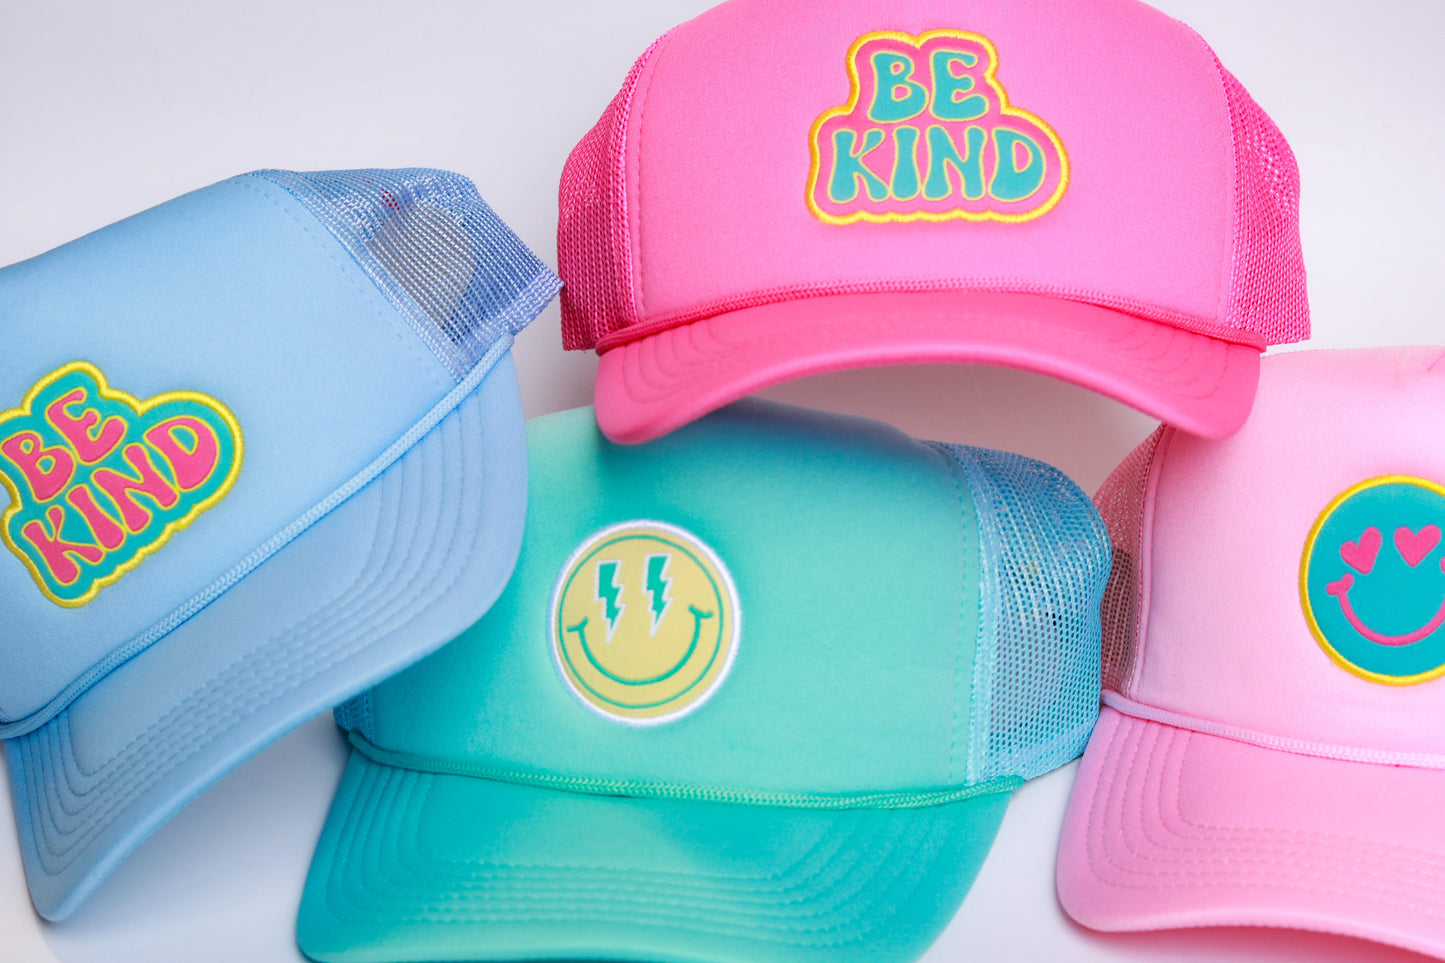 XOXO by magpies | Powder Blue Be Kind Trucker